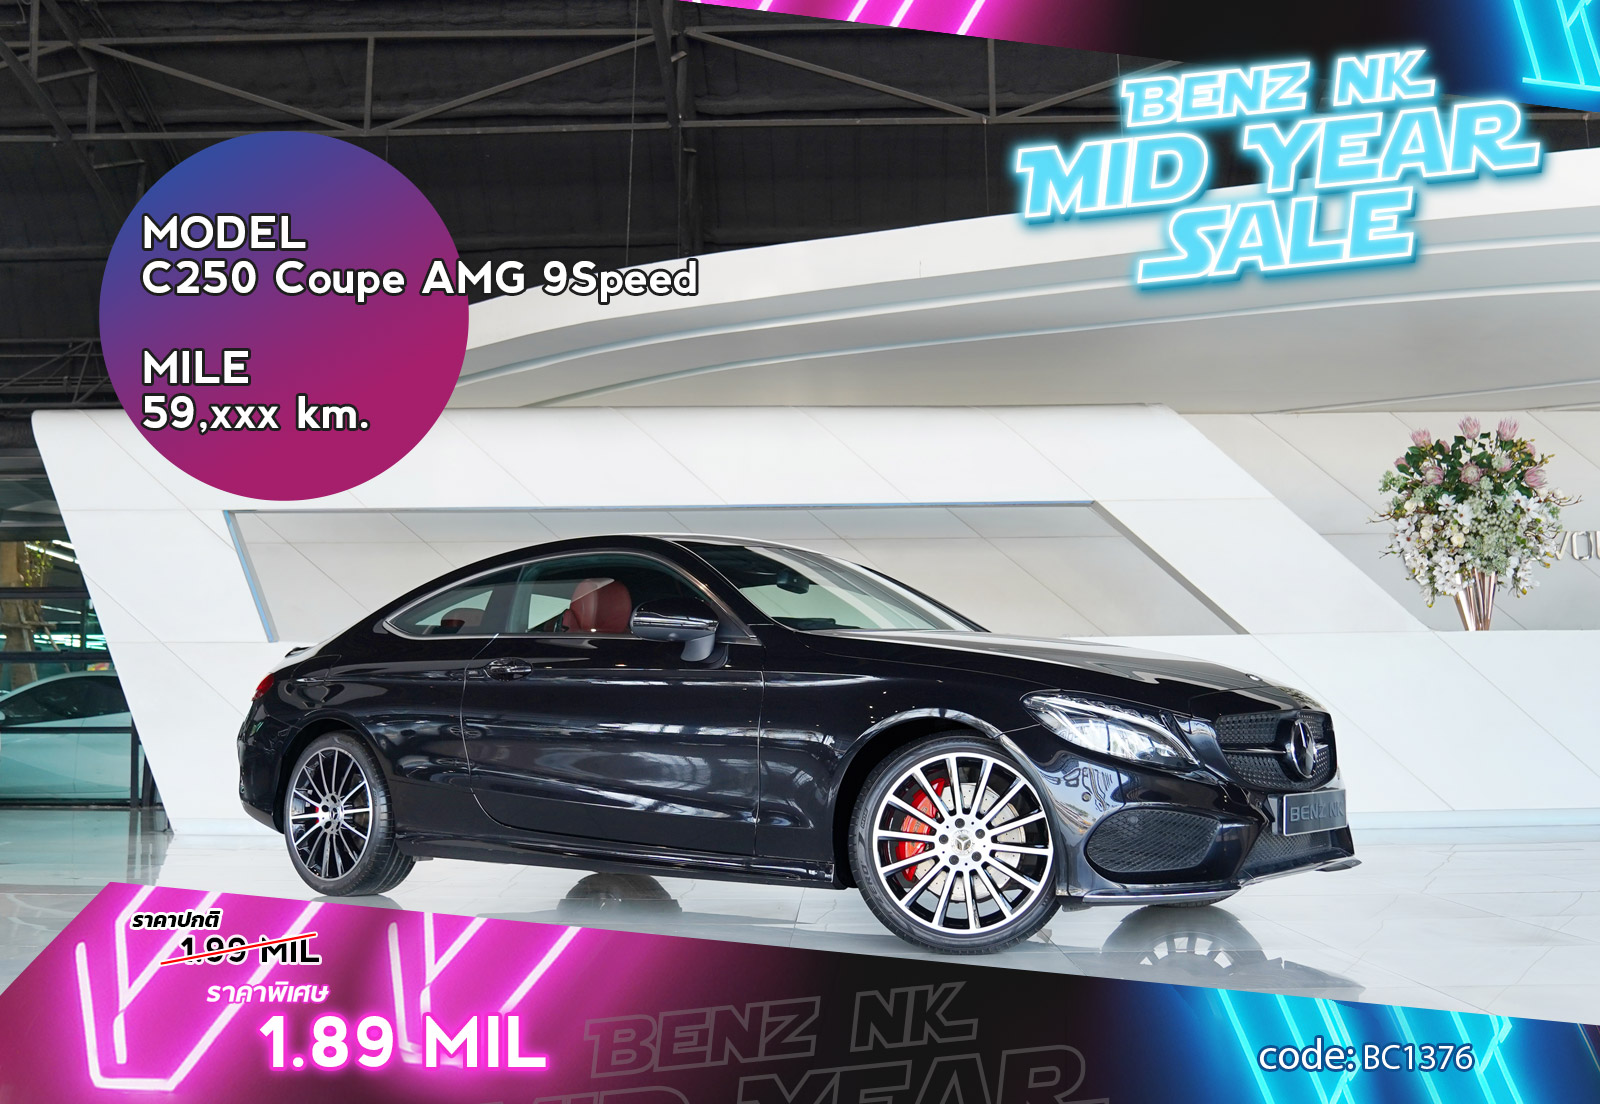 C250 Coupe AMG 9 Speed